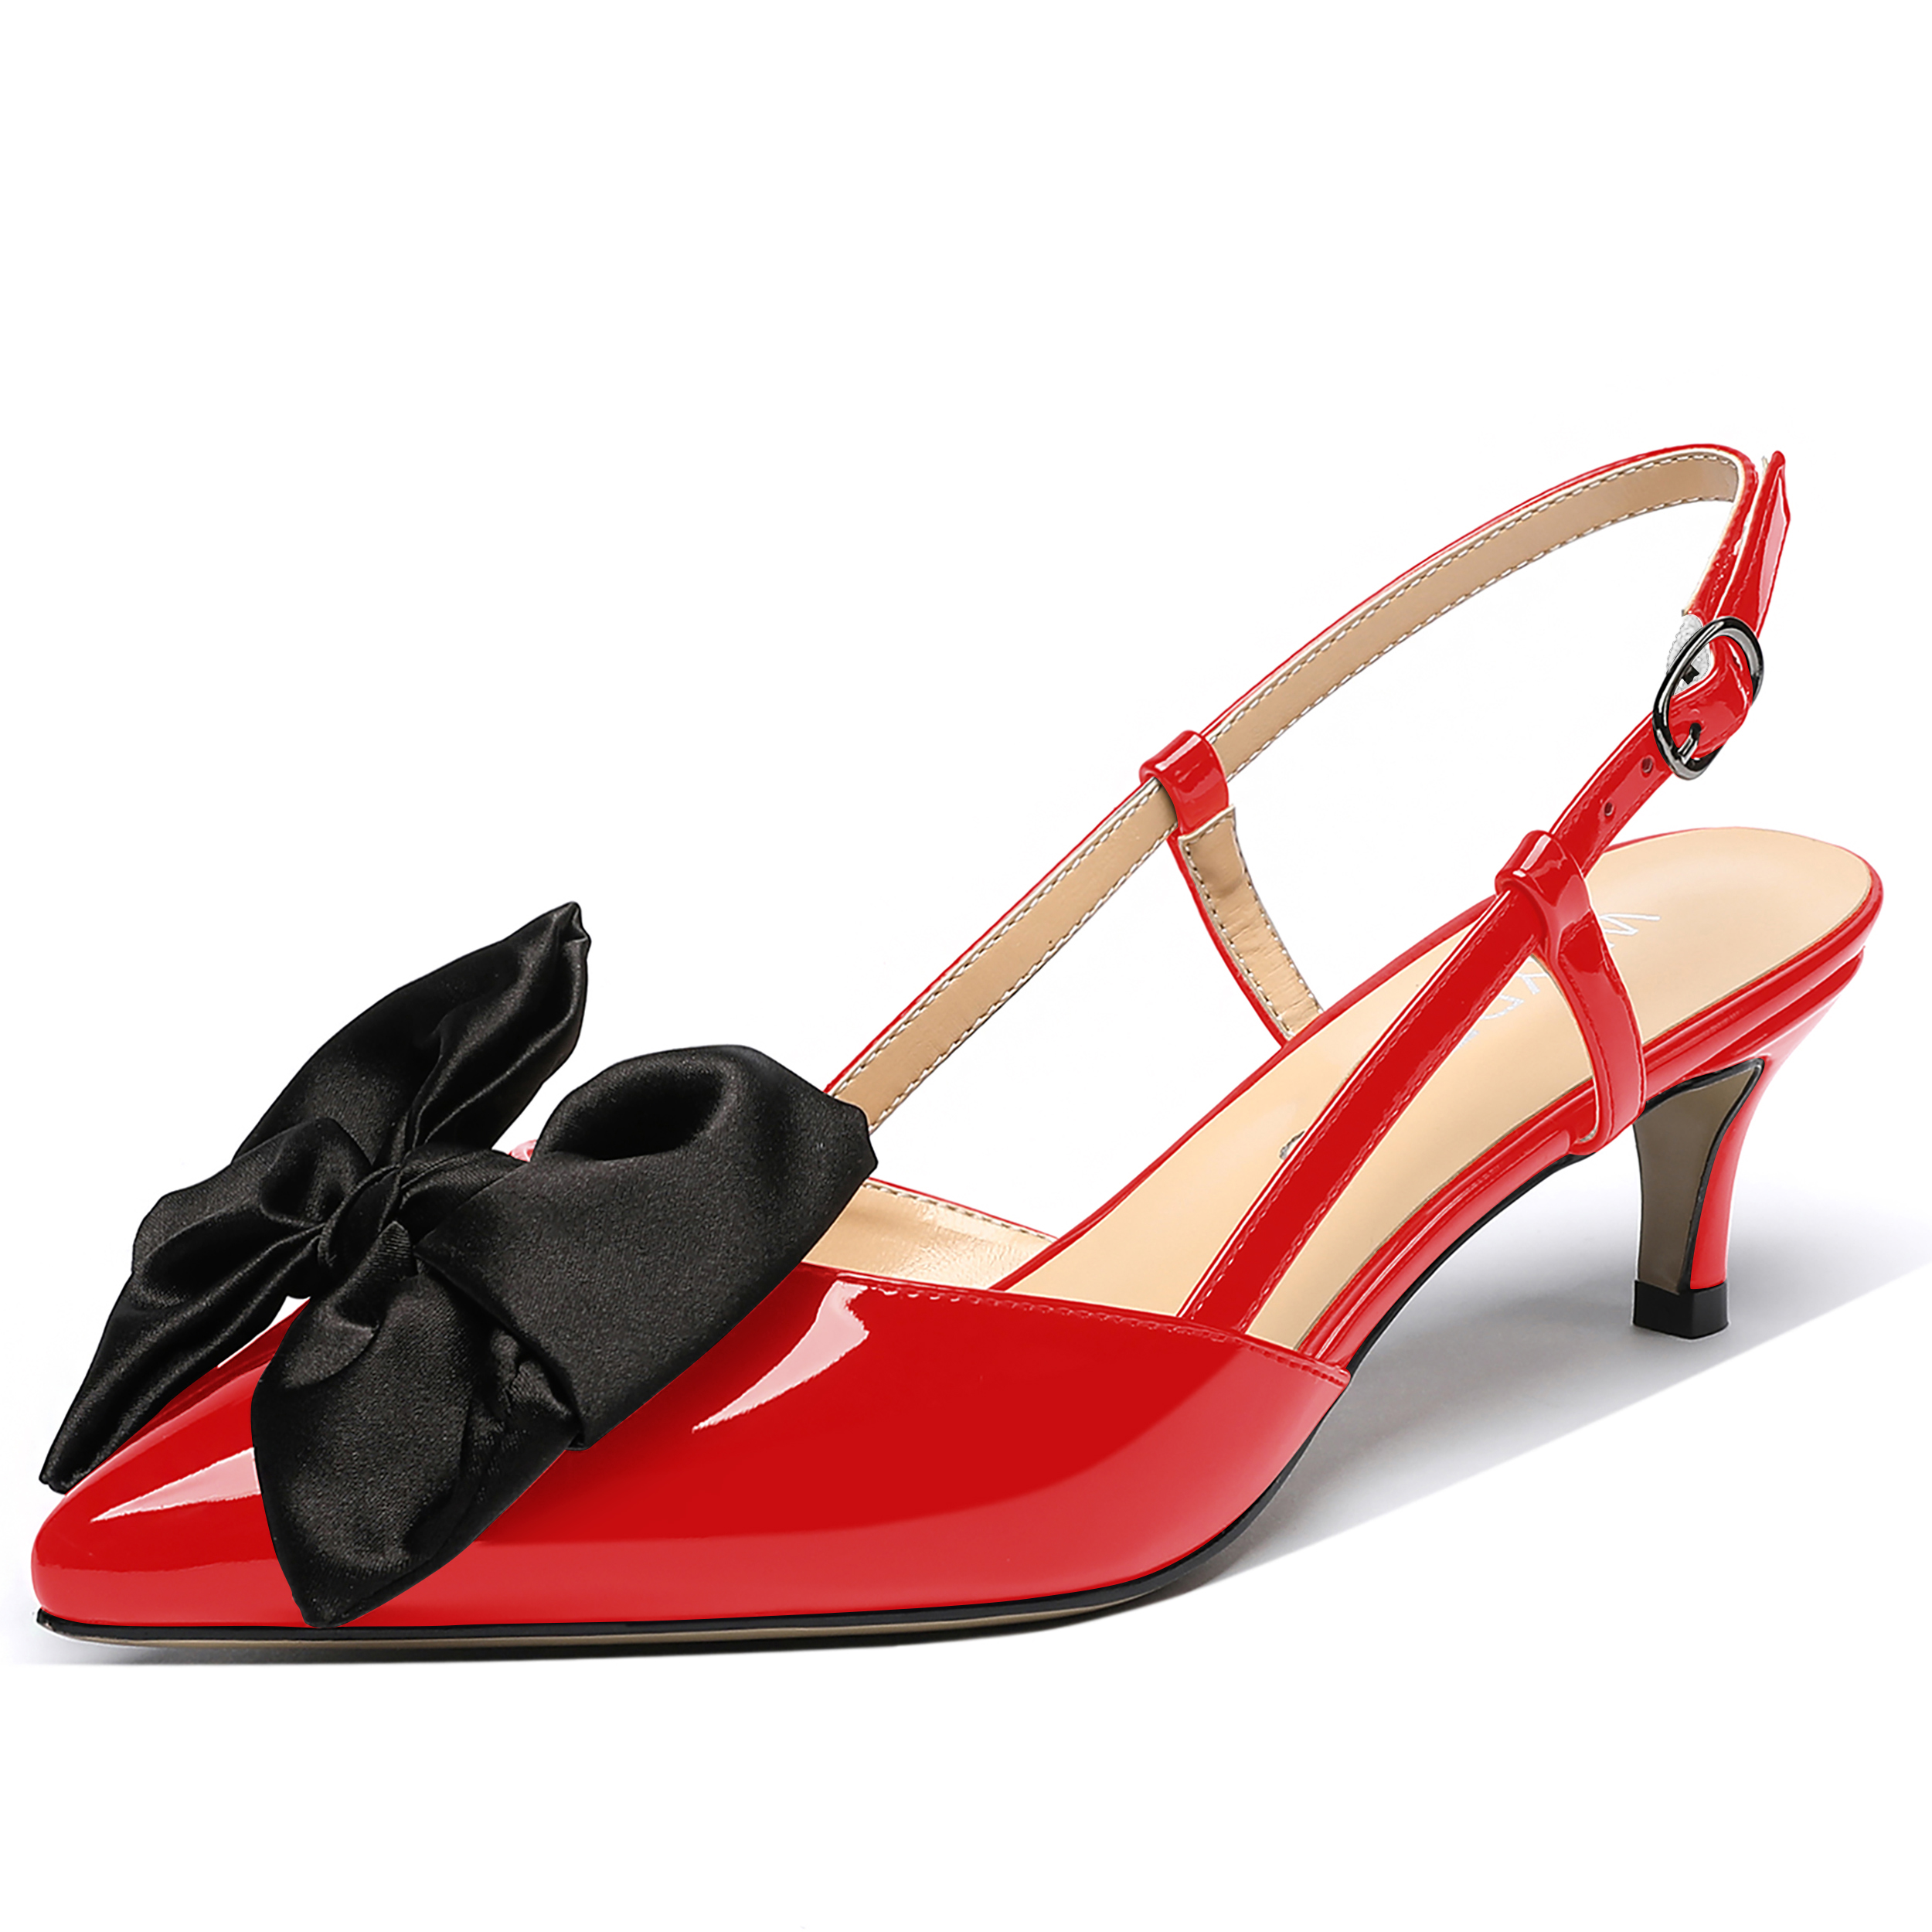 Kendyll Buckle Slingback Heels with Bow Decoration